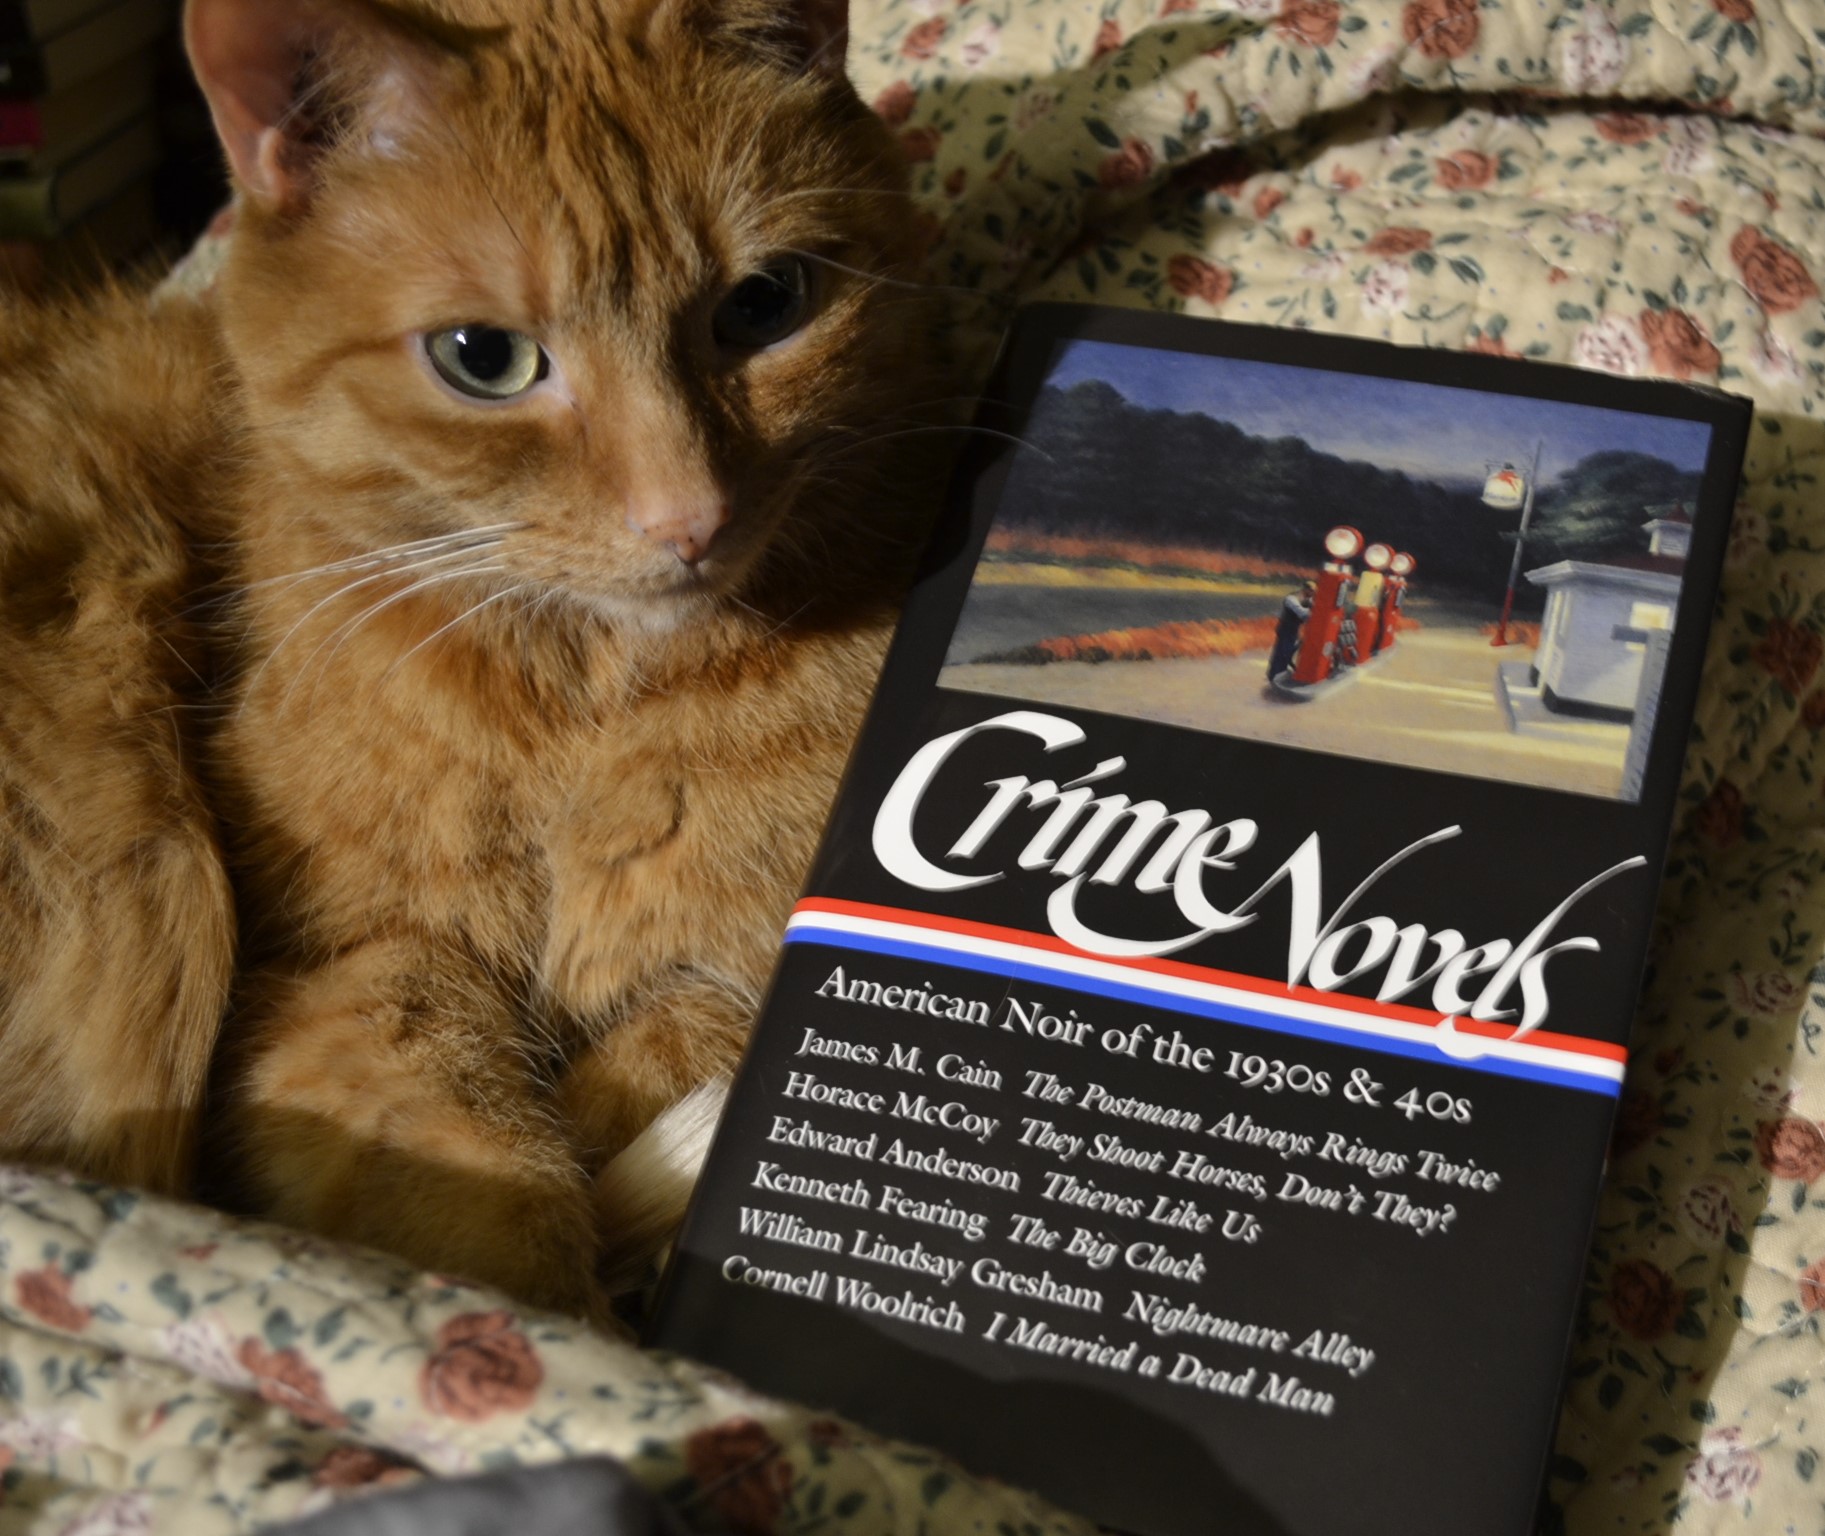 An orange tabby curls beside a book with a black dust jacket that has a painting of an old-fashioned gas station on it.